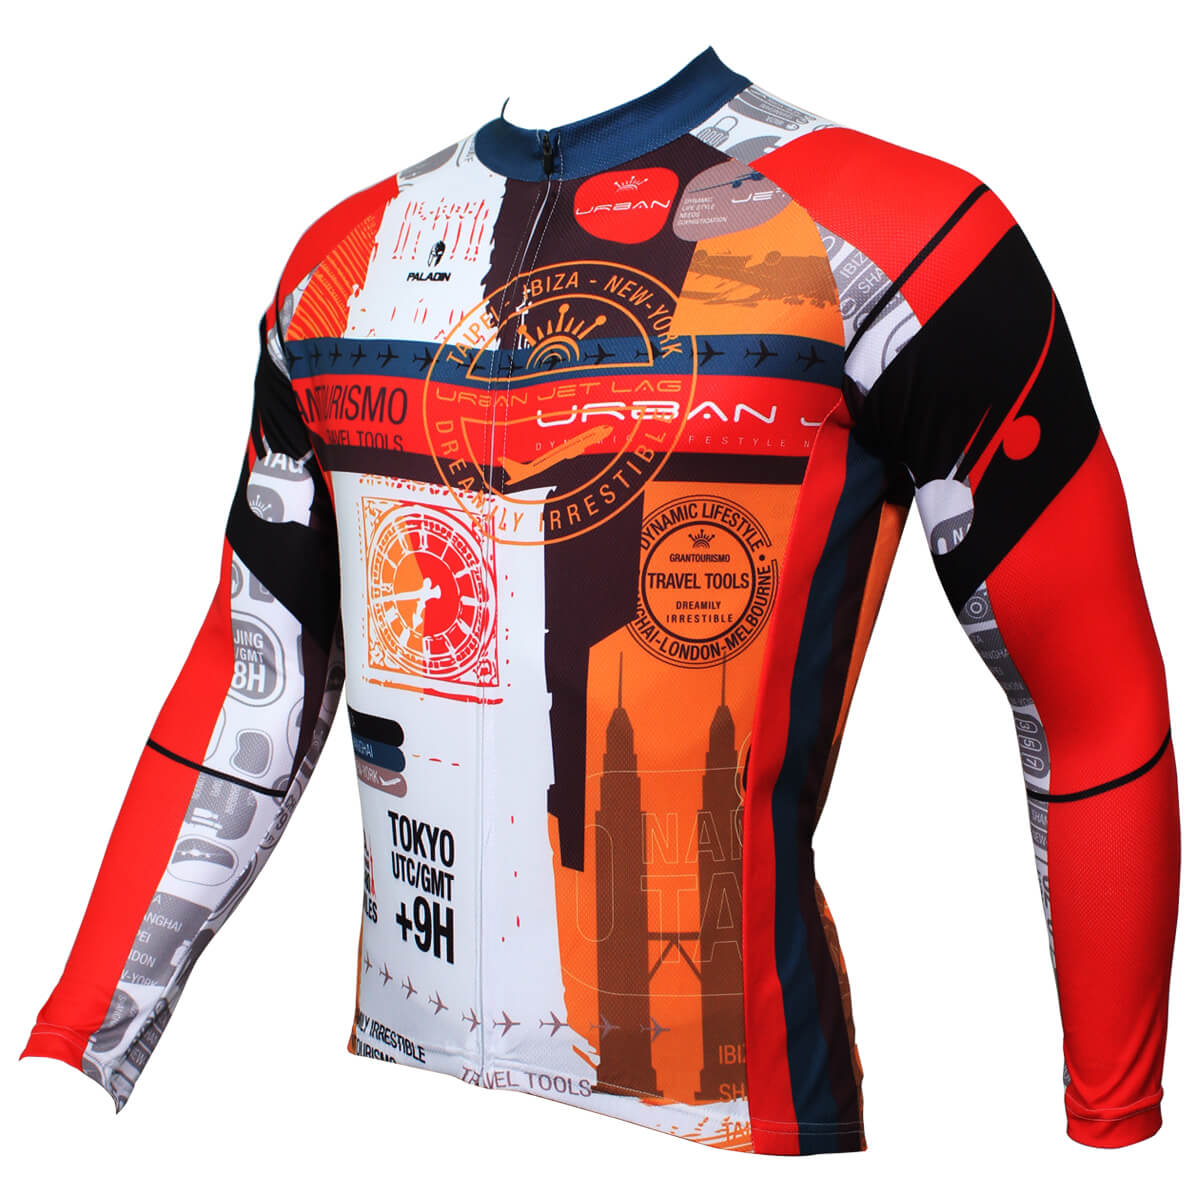 Travel Round The World Design Red Bike Jerseys For Mens | Chogory